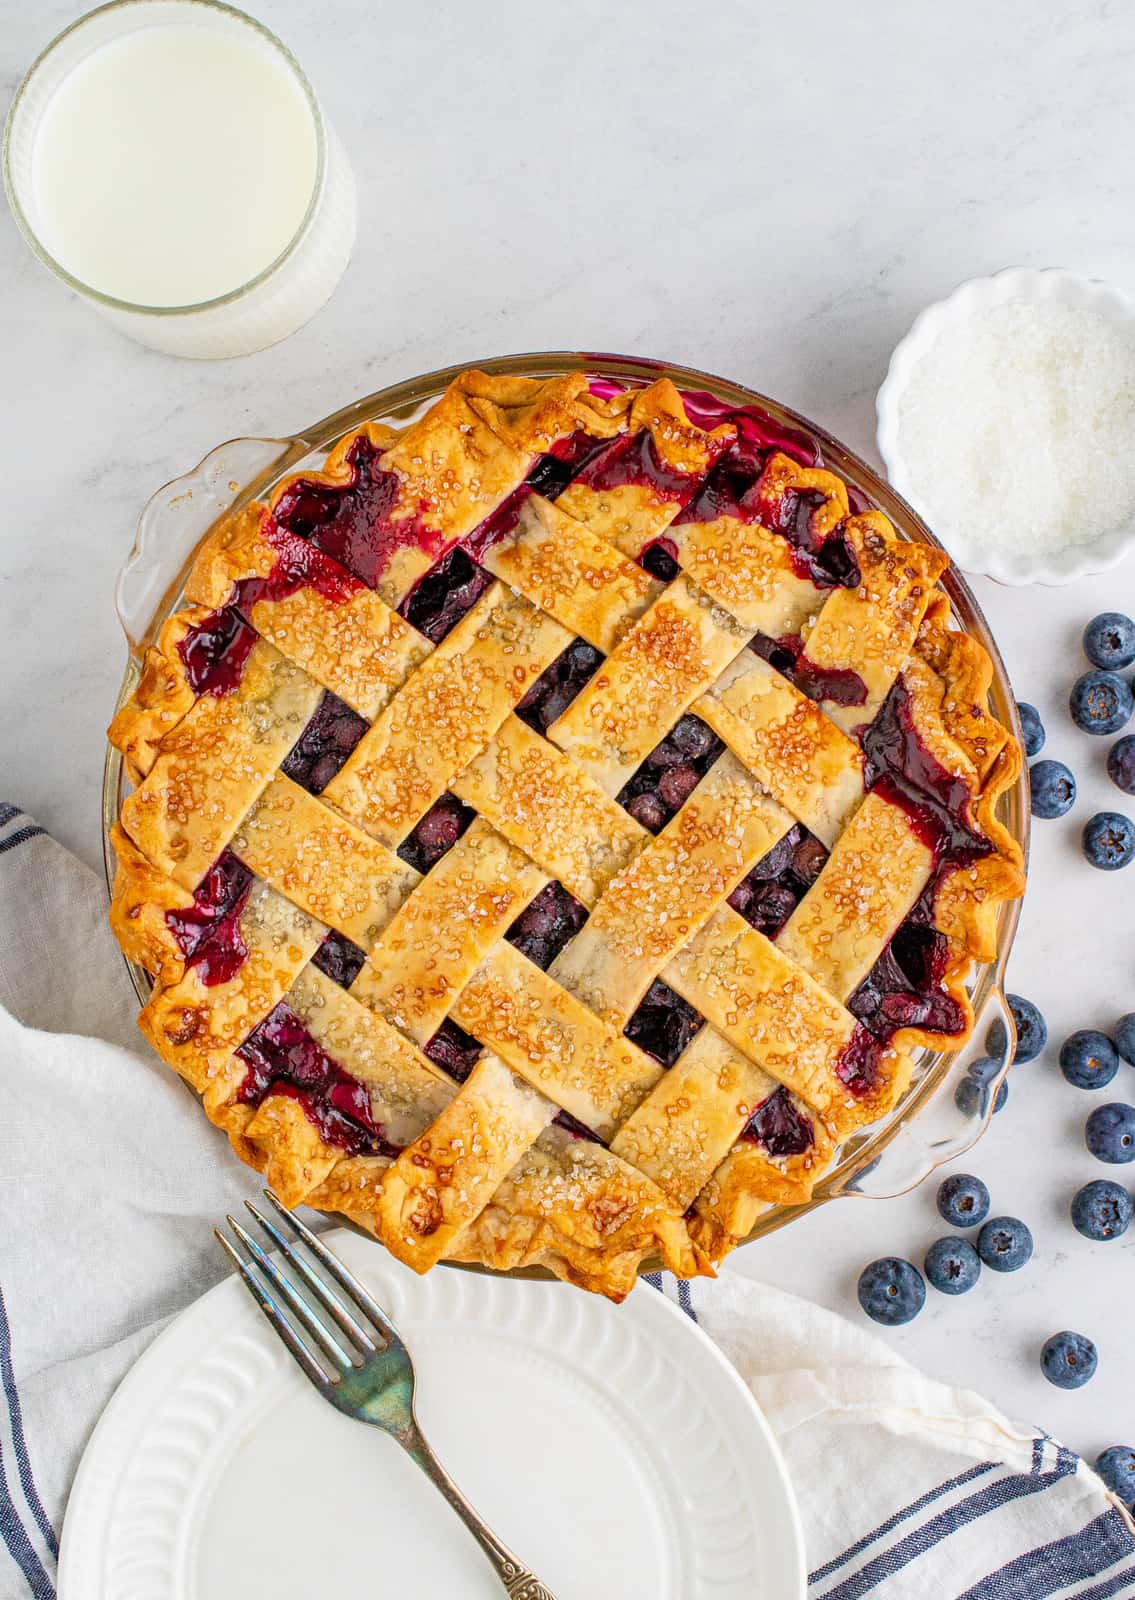 Finished Blueberry Pie Recipe